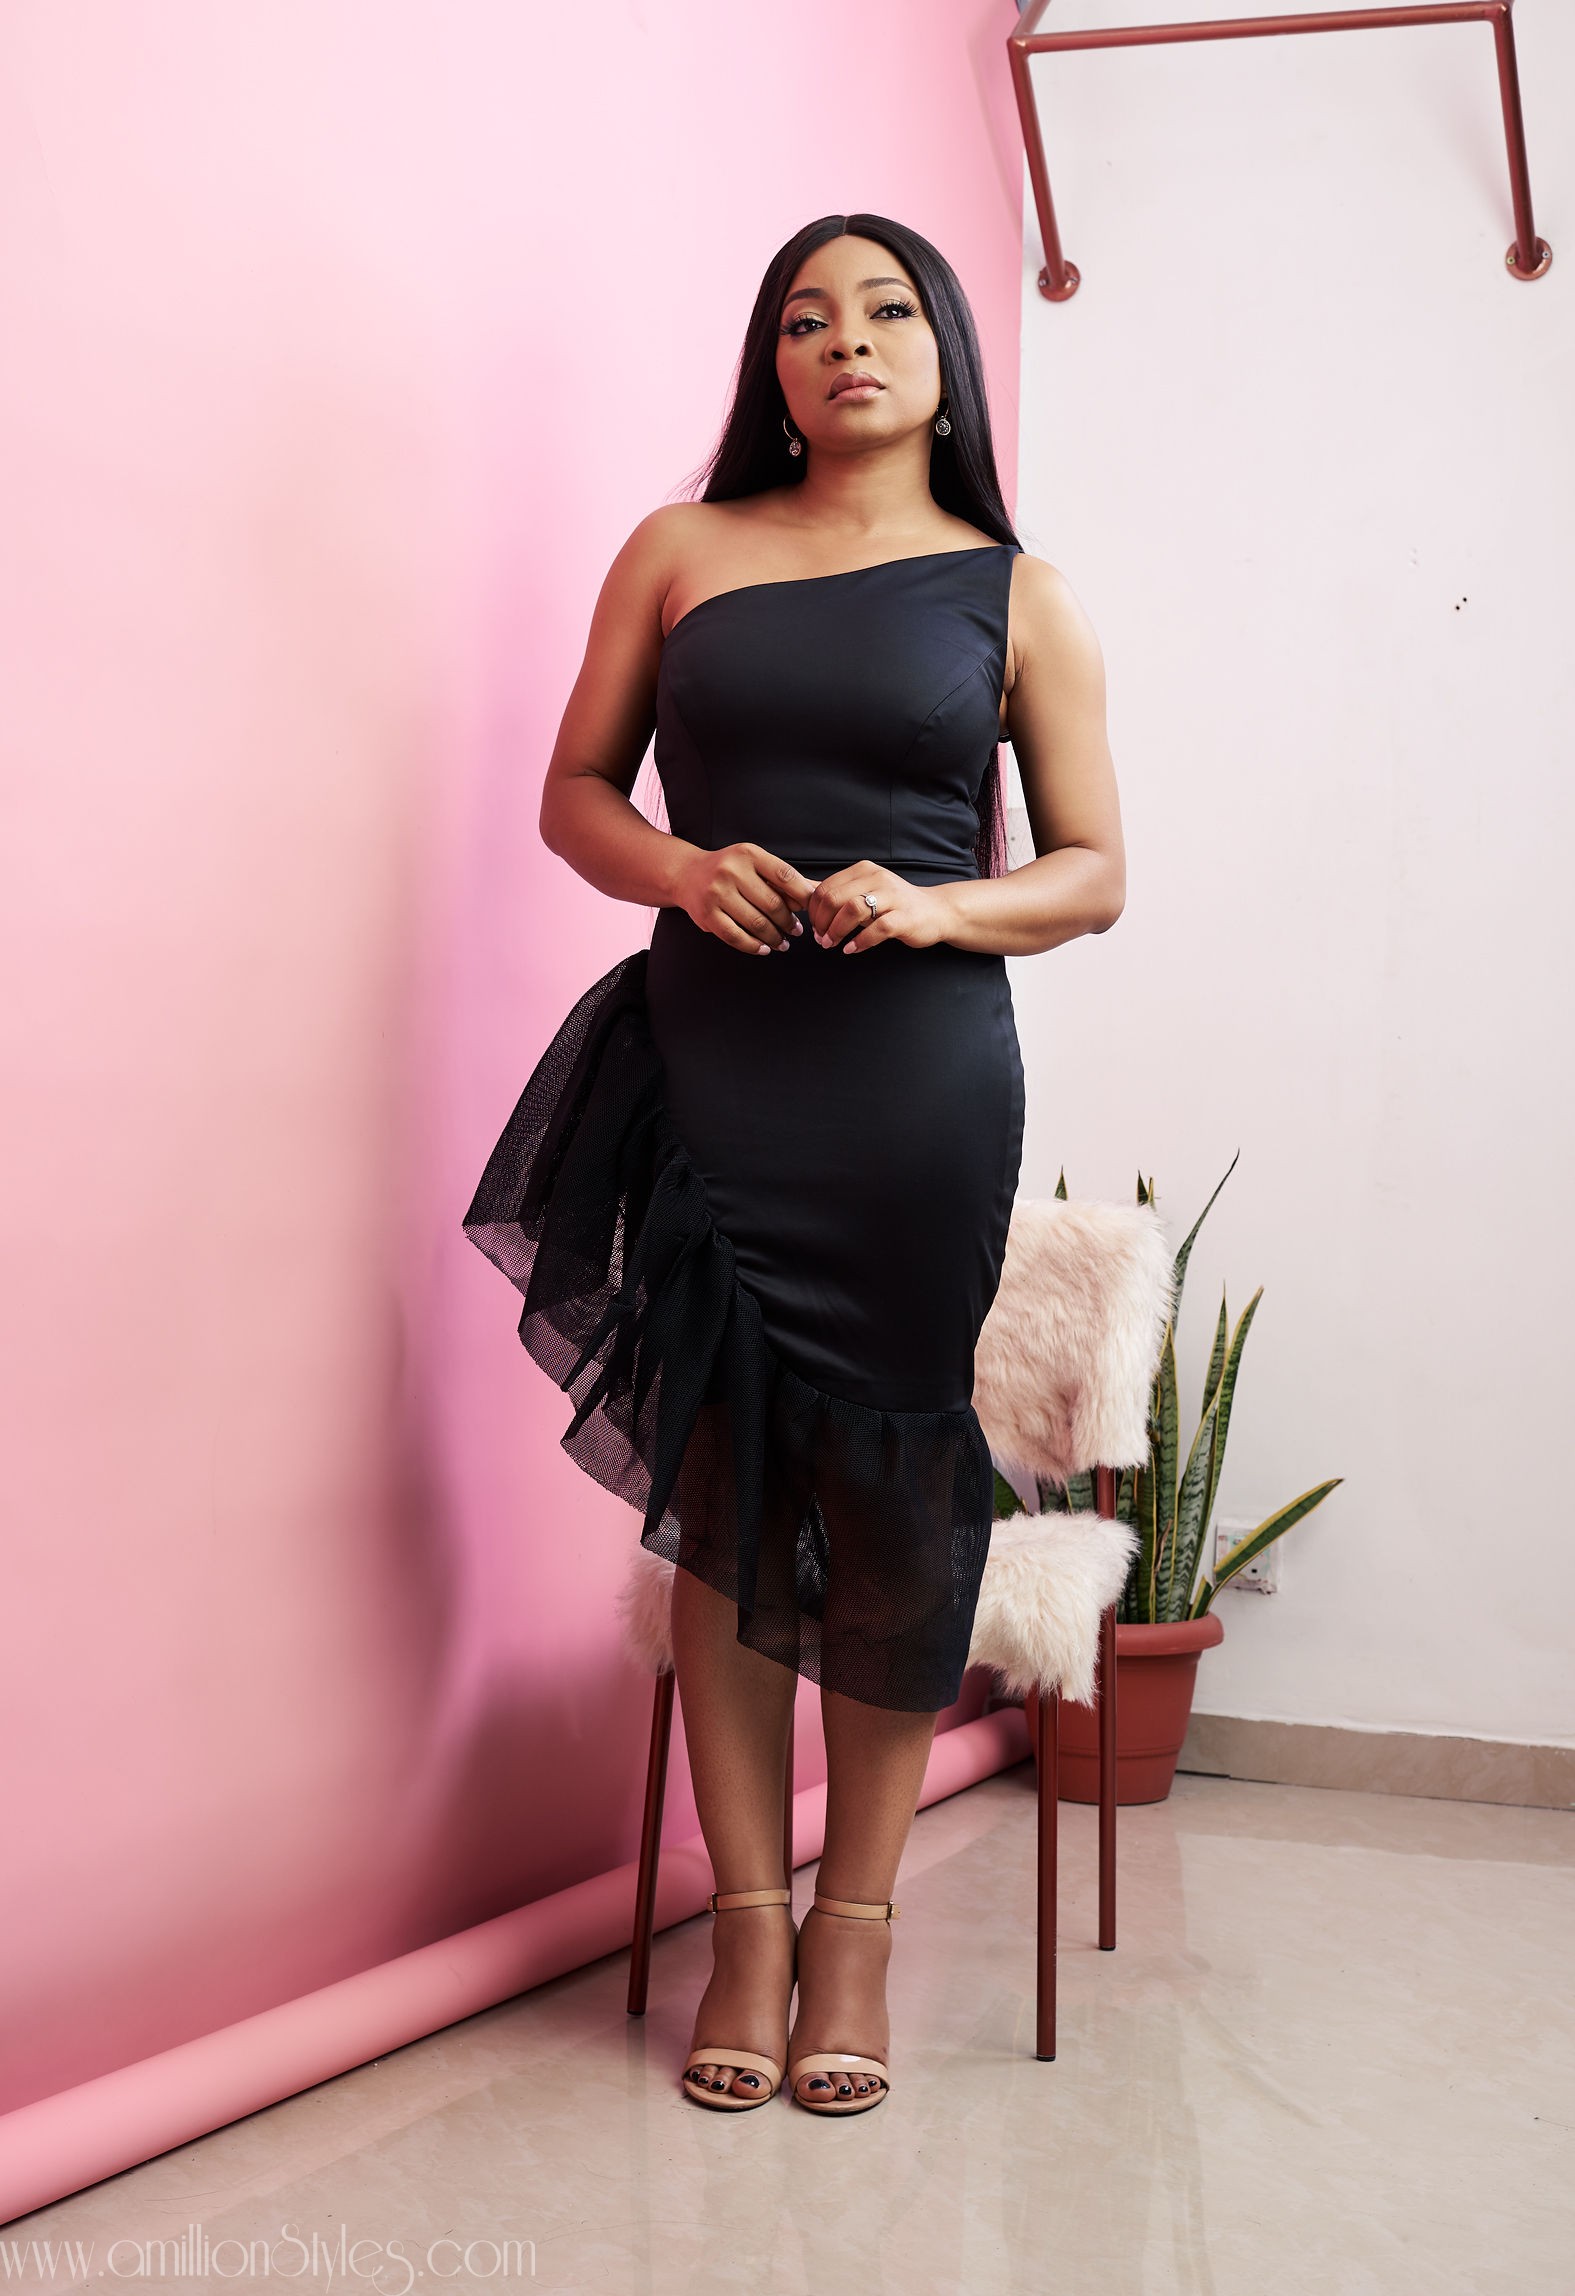 Ihuoma Linda Ejiofor Is The Face Of Ayaba Woman’s Holiday Campaign